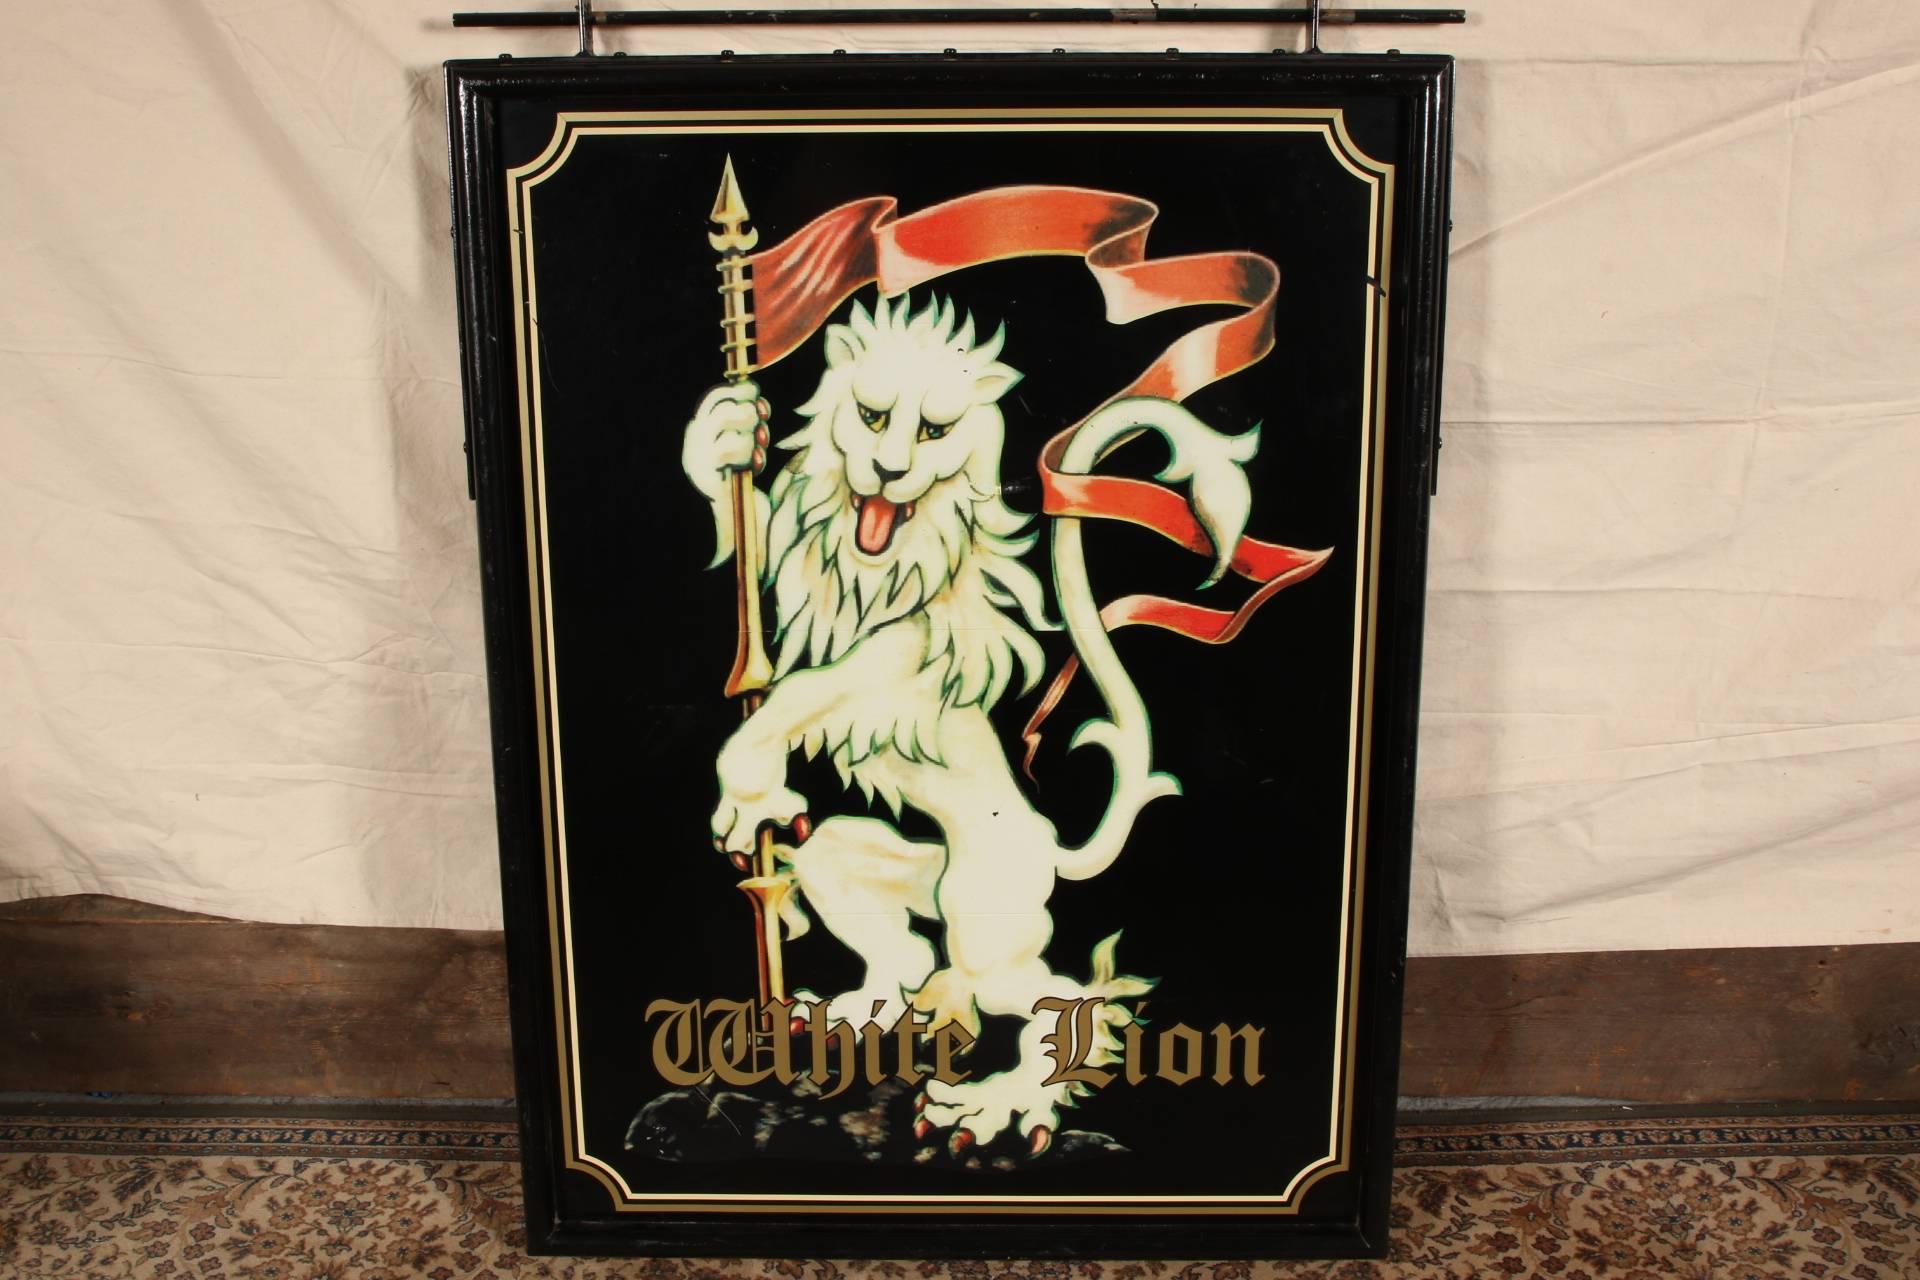 Metal double-sided sign with applied lion decal. Likely came from a pub or bar.
Condition: shows some wear due to outdoor usage.